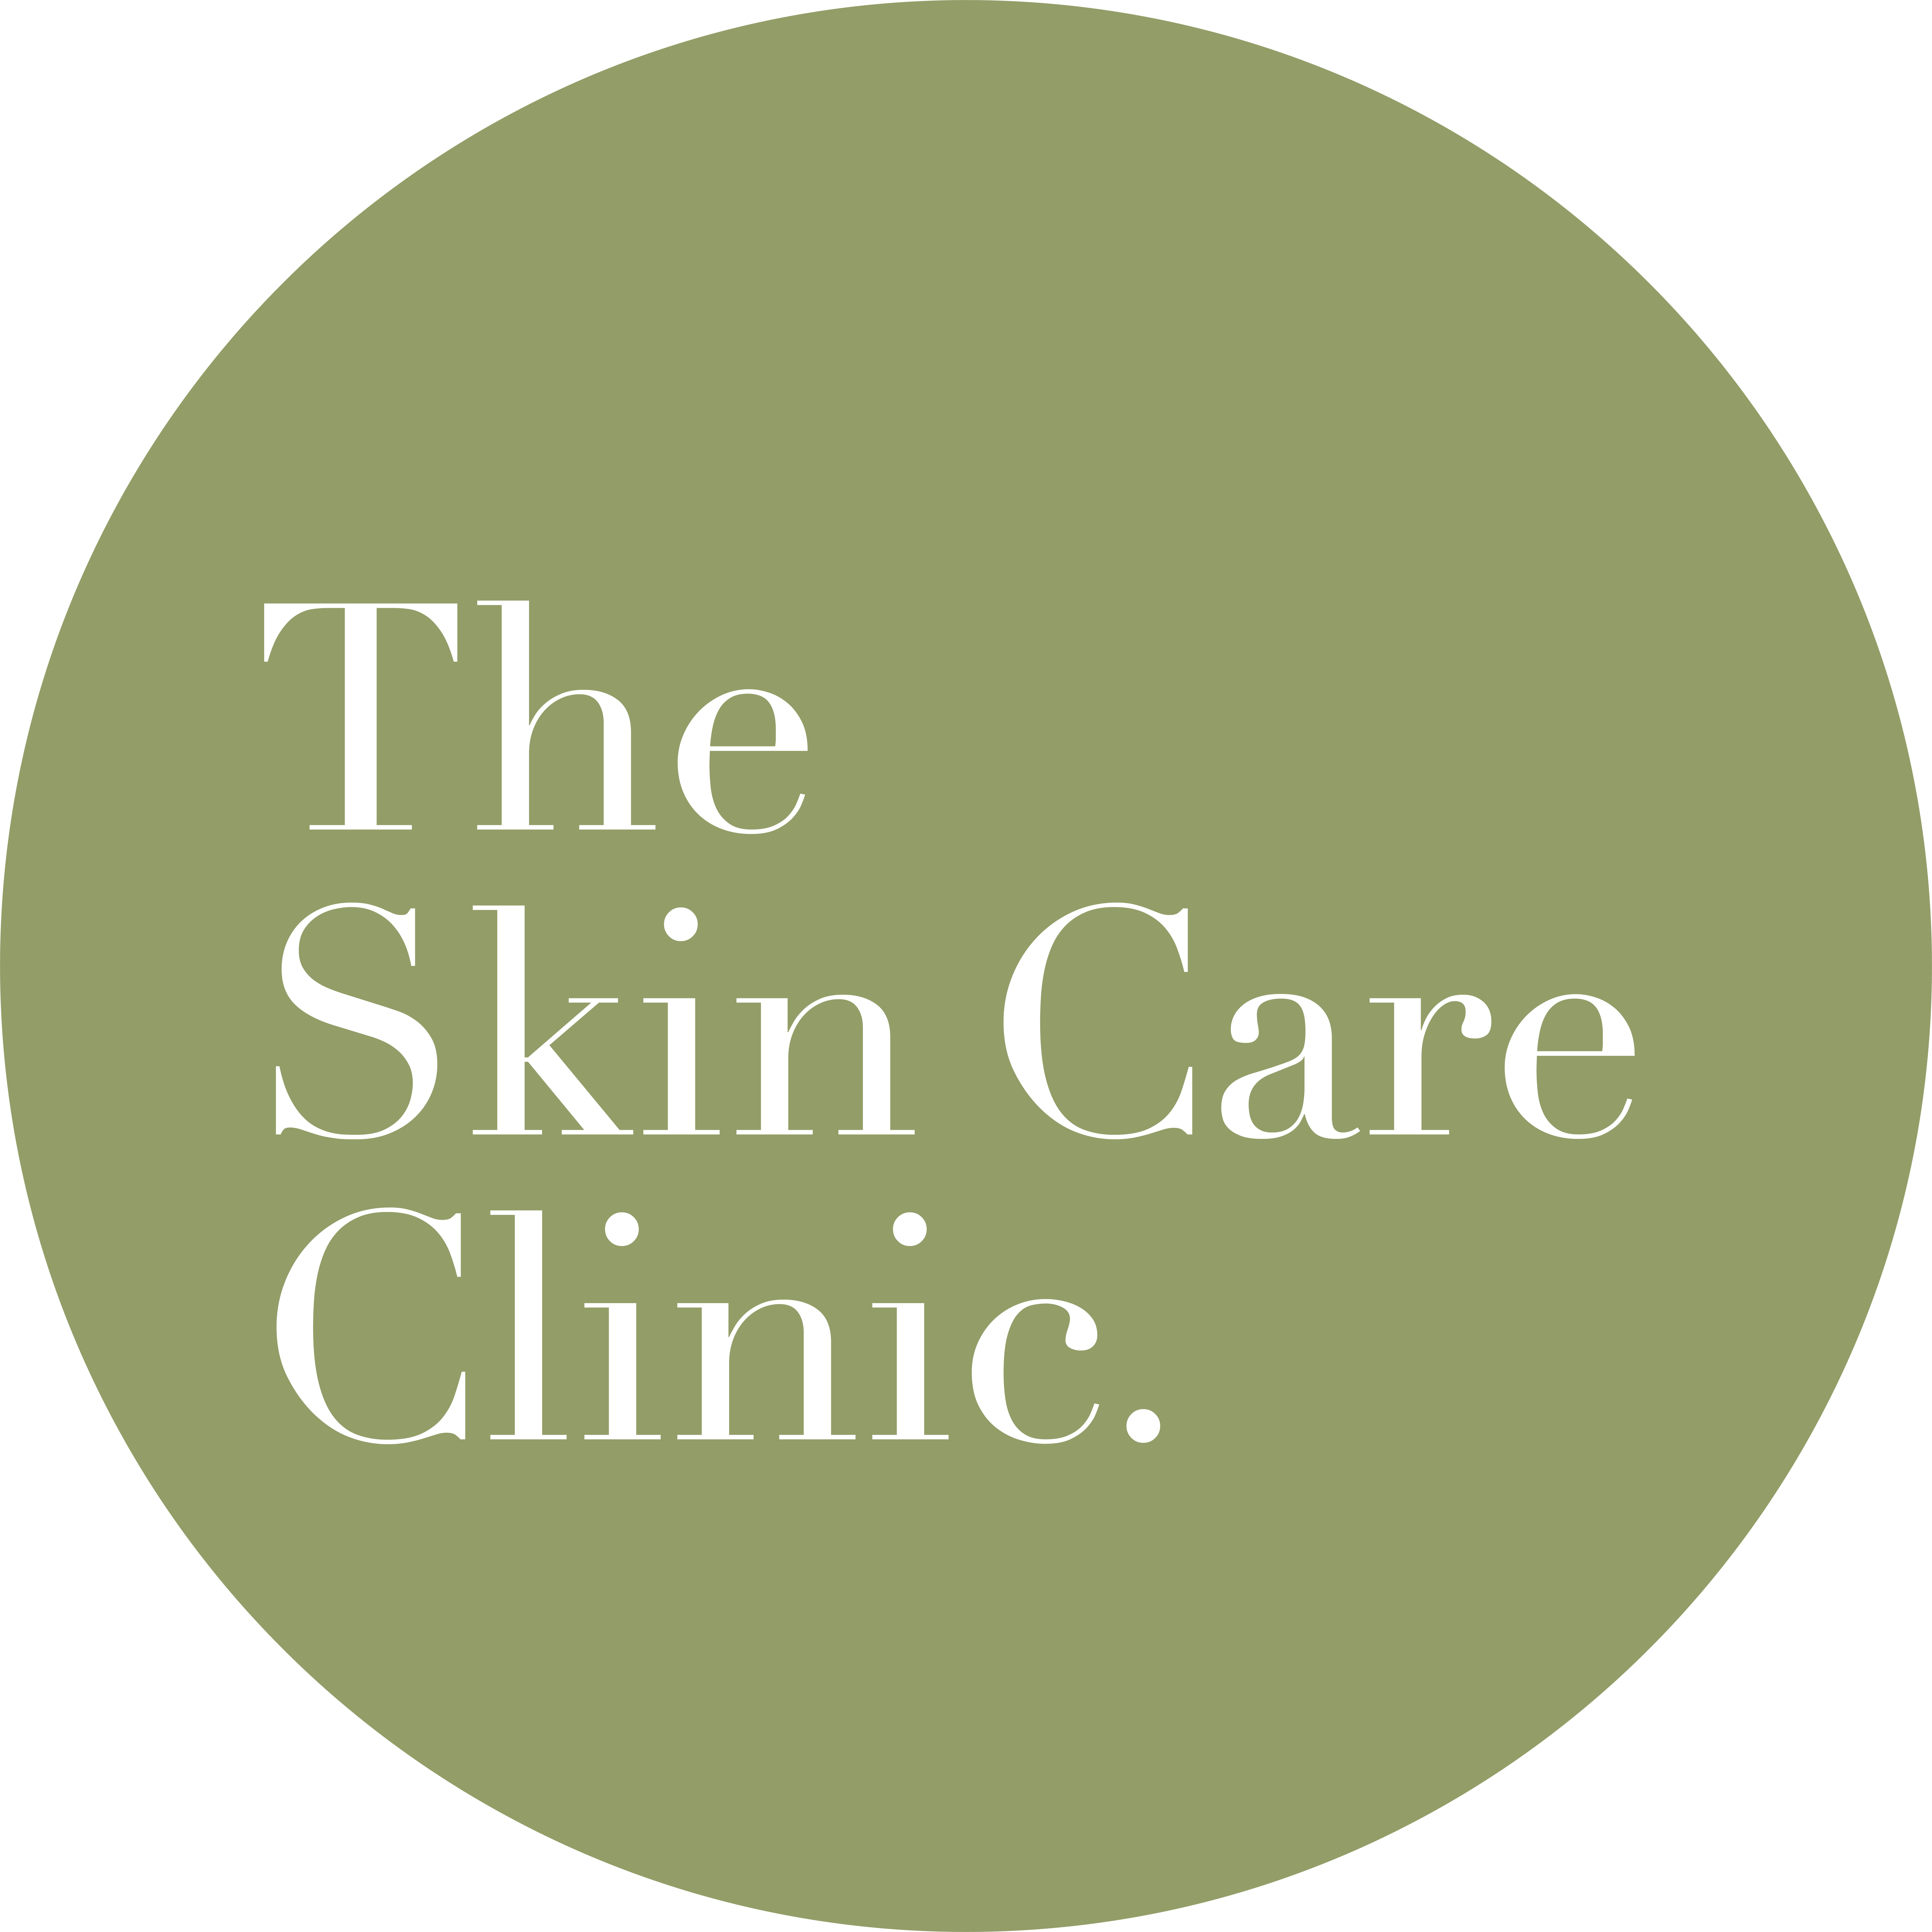 The Skin Care Clinic